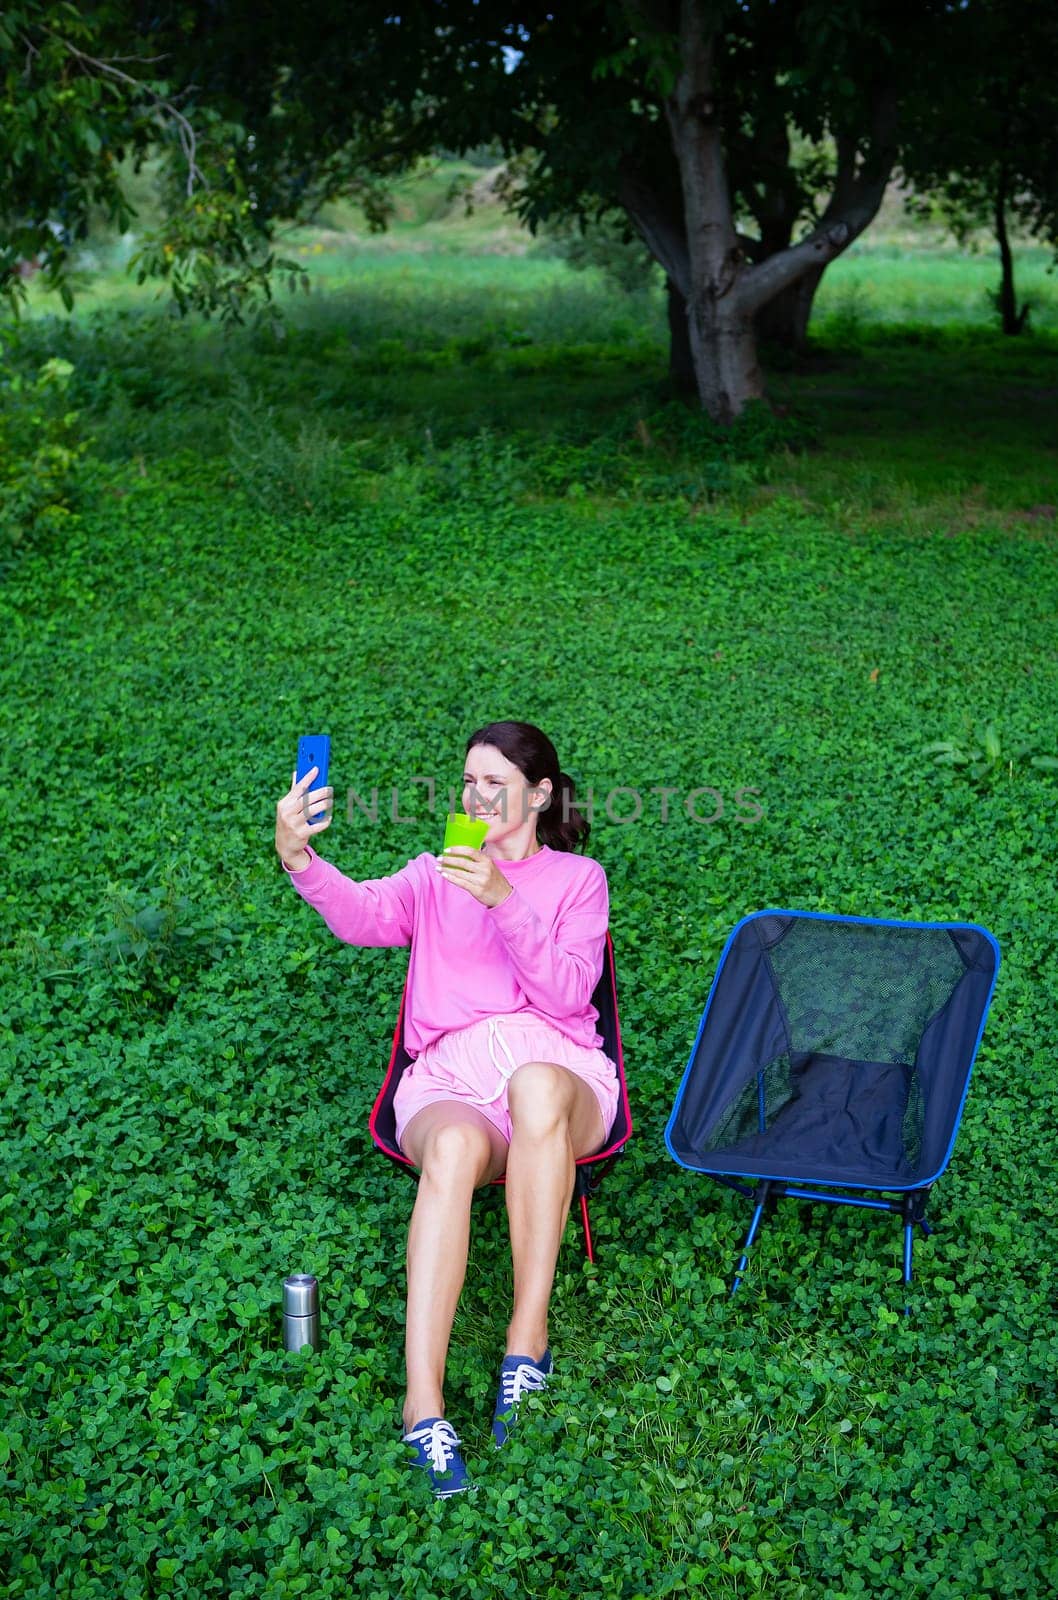 A girl in pink takes a selfie outdoors while sitting on a blue chair among lush greenery. by sfinks